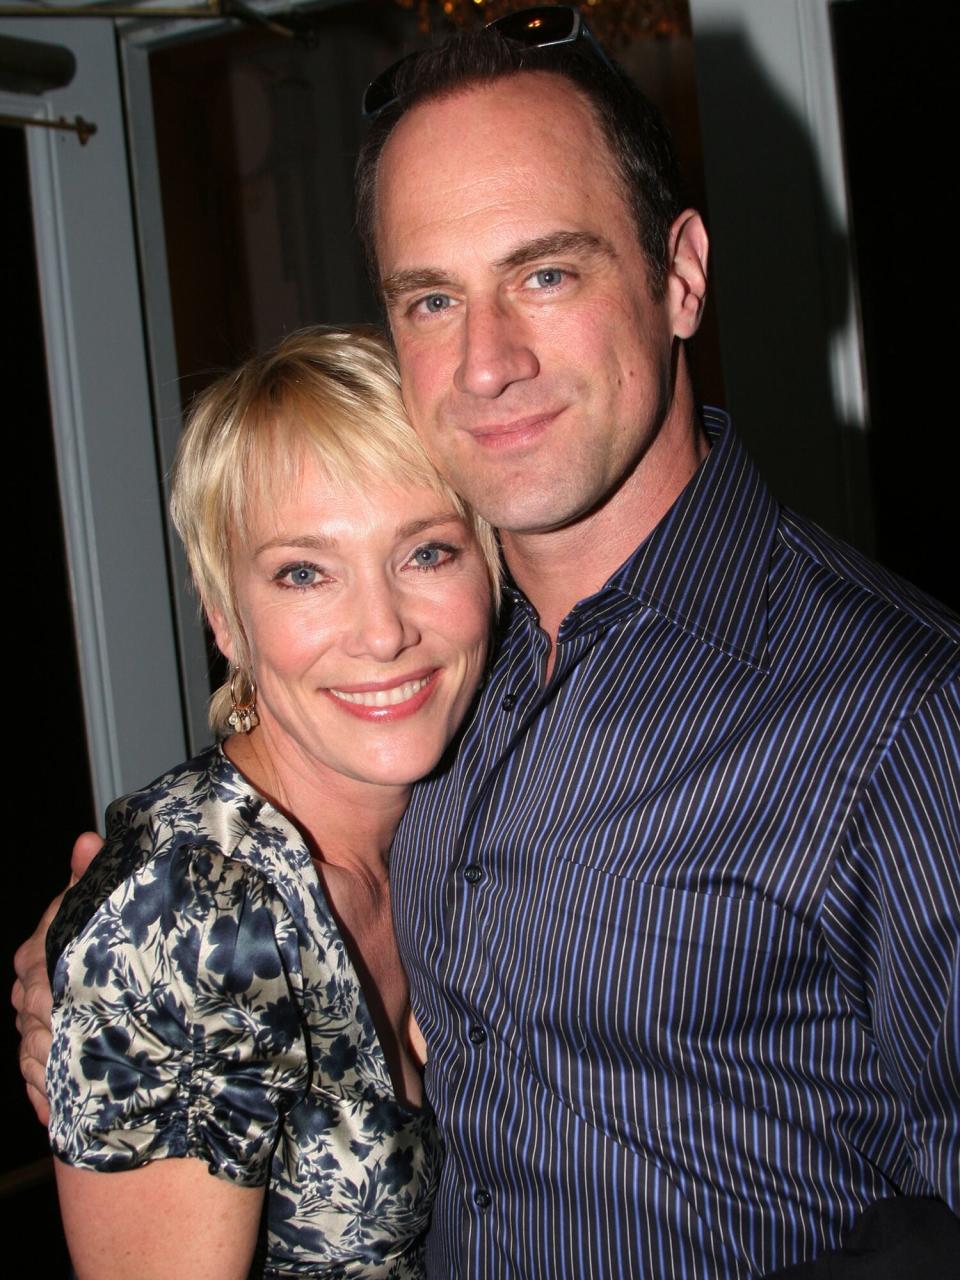 Christopher Meloni and wife Sherman during Opening Night for Brian Friel's Faith Healer on Broadway - May 4, 2006 at The Booth Theater in New York City, New York, United States.